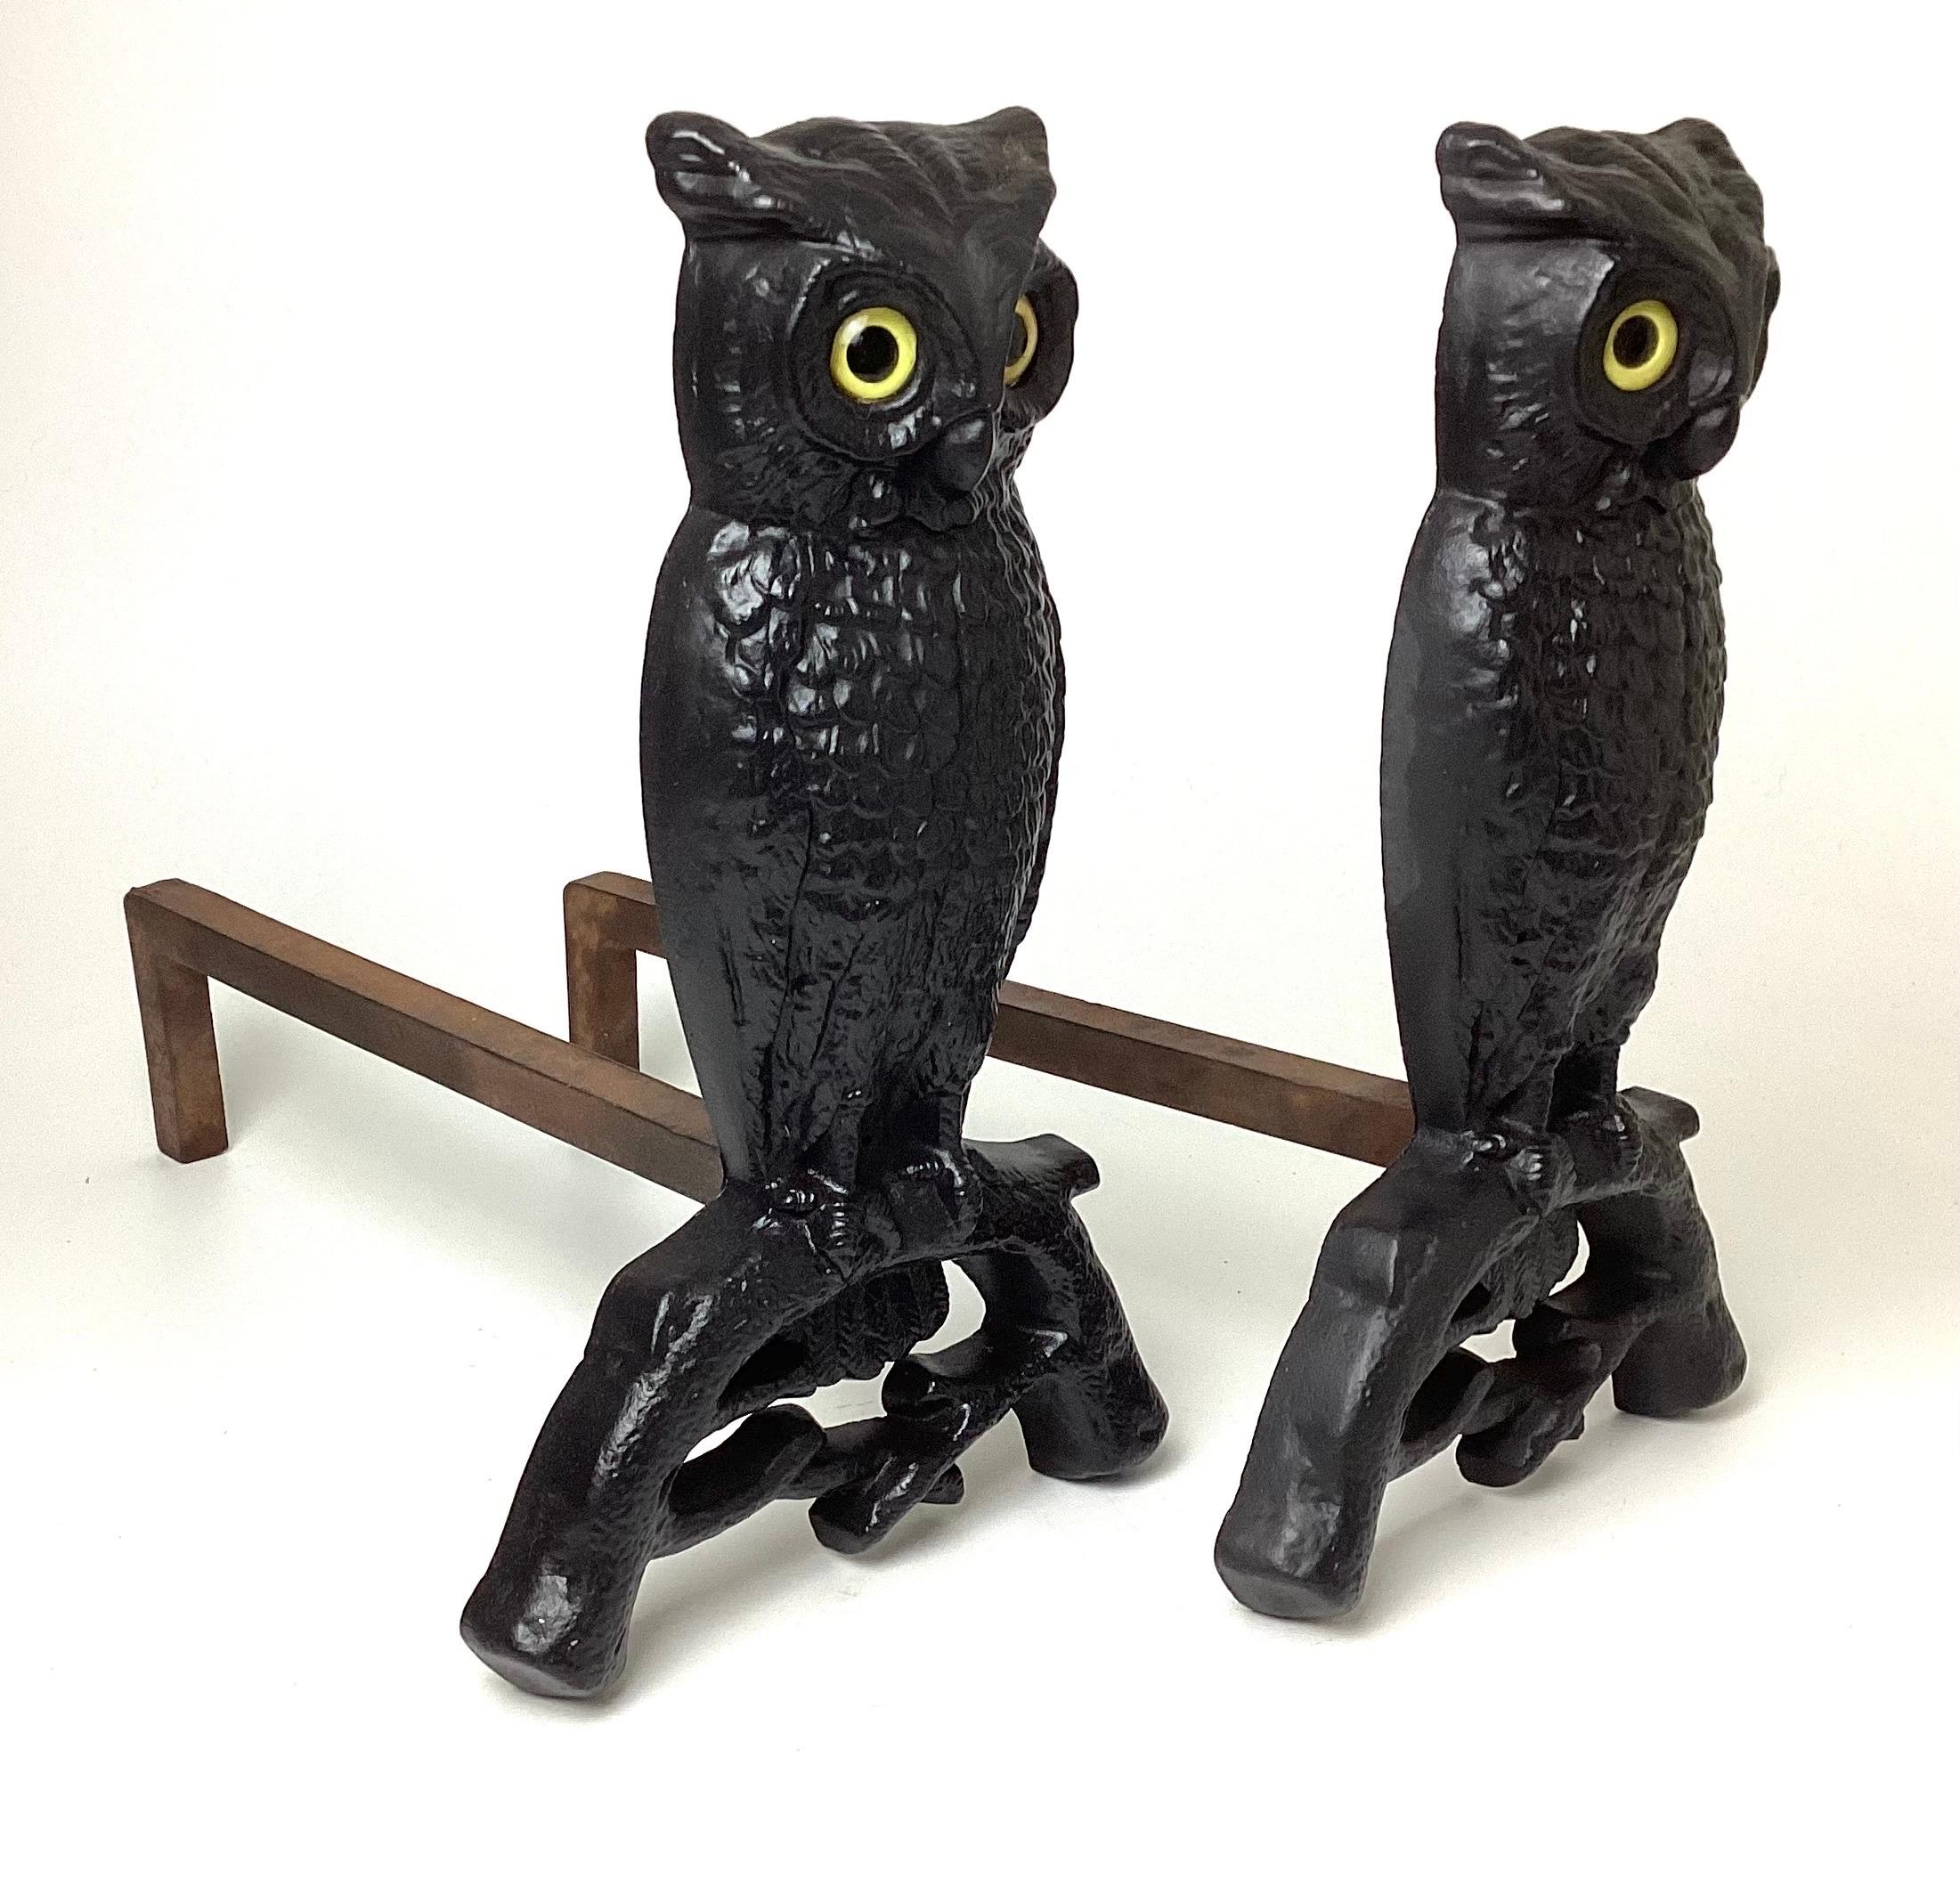 Cast Iron Owl Andirons with Glass Eyes from the early 20th century. Some minor surface rust. Eyes glow with light behind. Log dogs will be removed for shipping. Each dog is 14